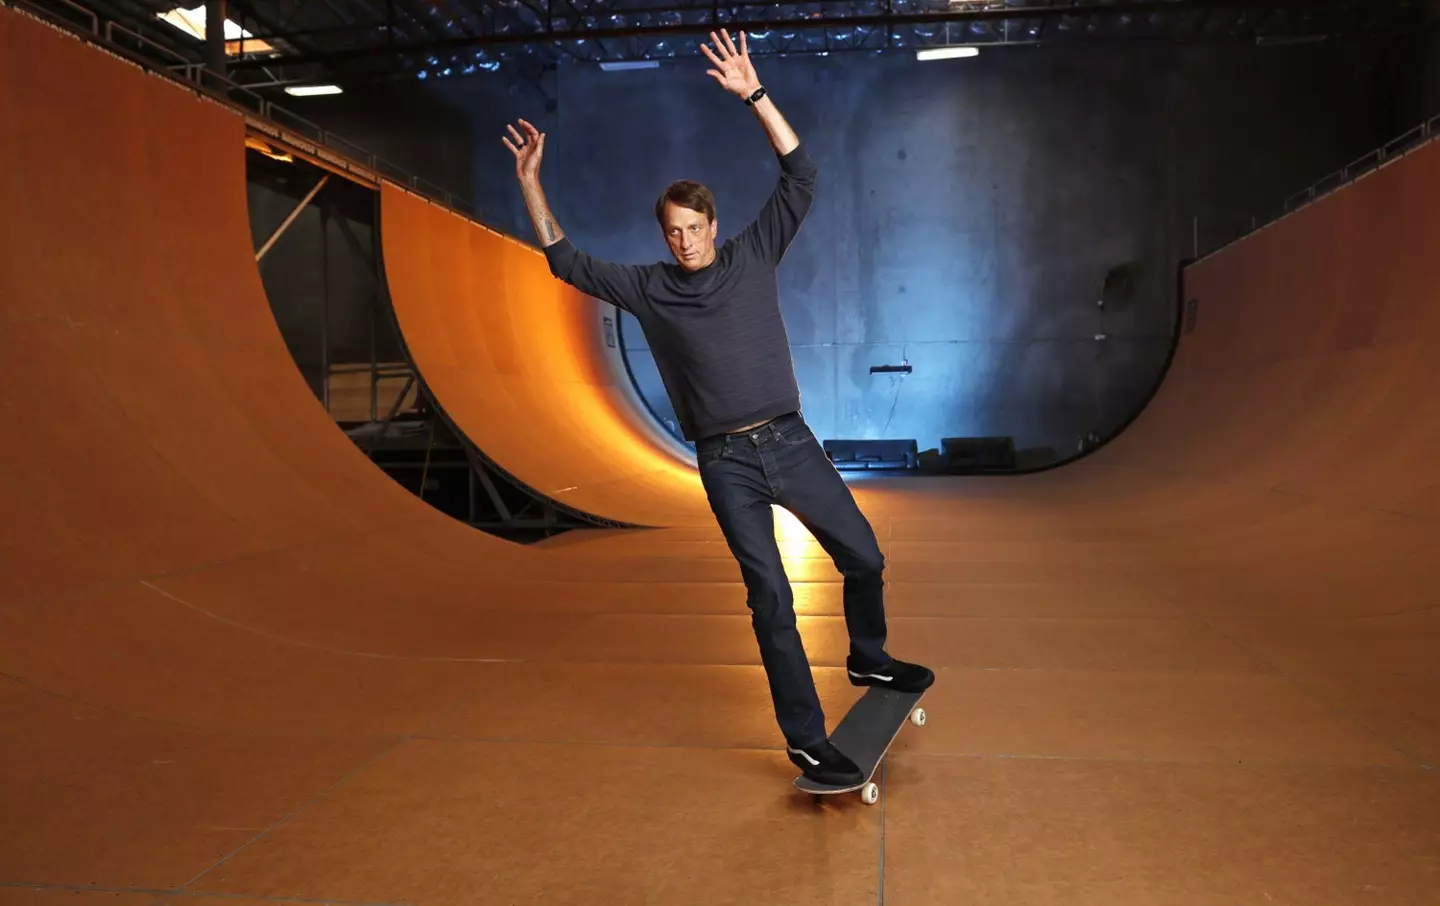 Tony Hawk said the money from the first games changed his life.